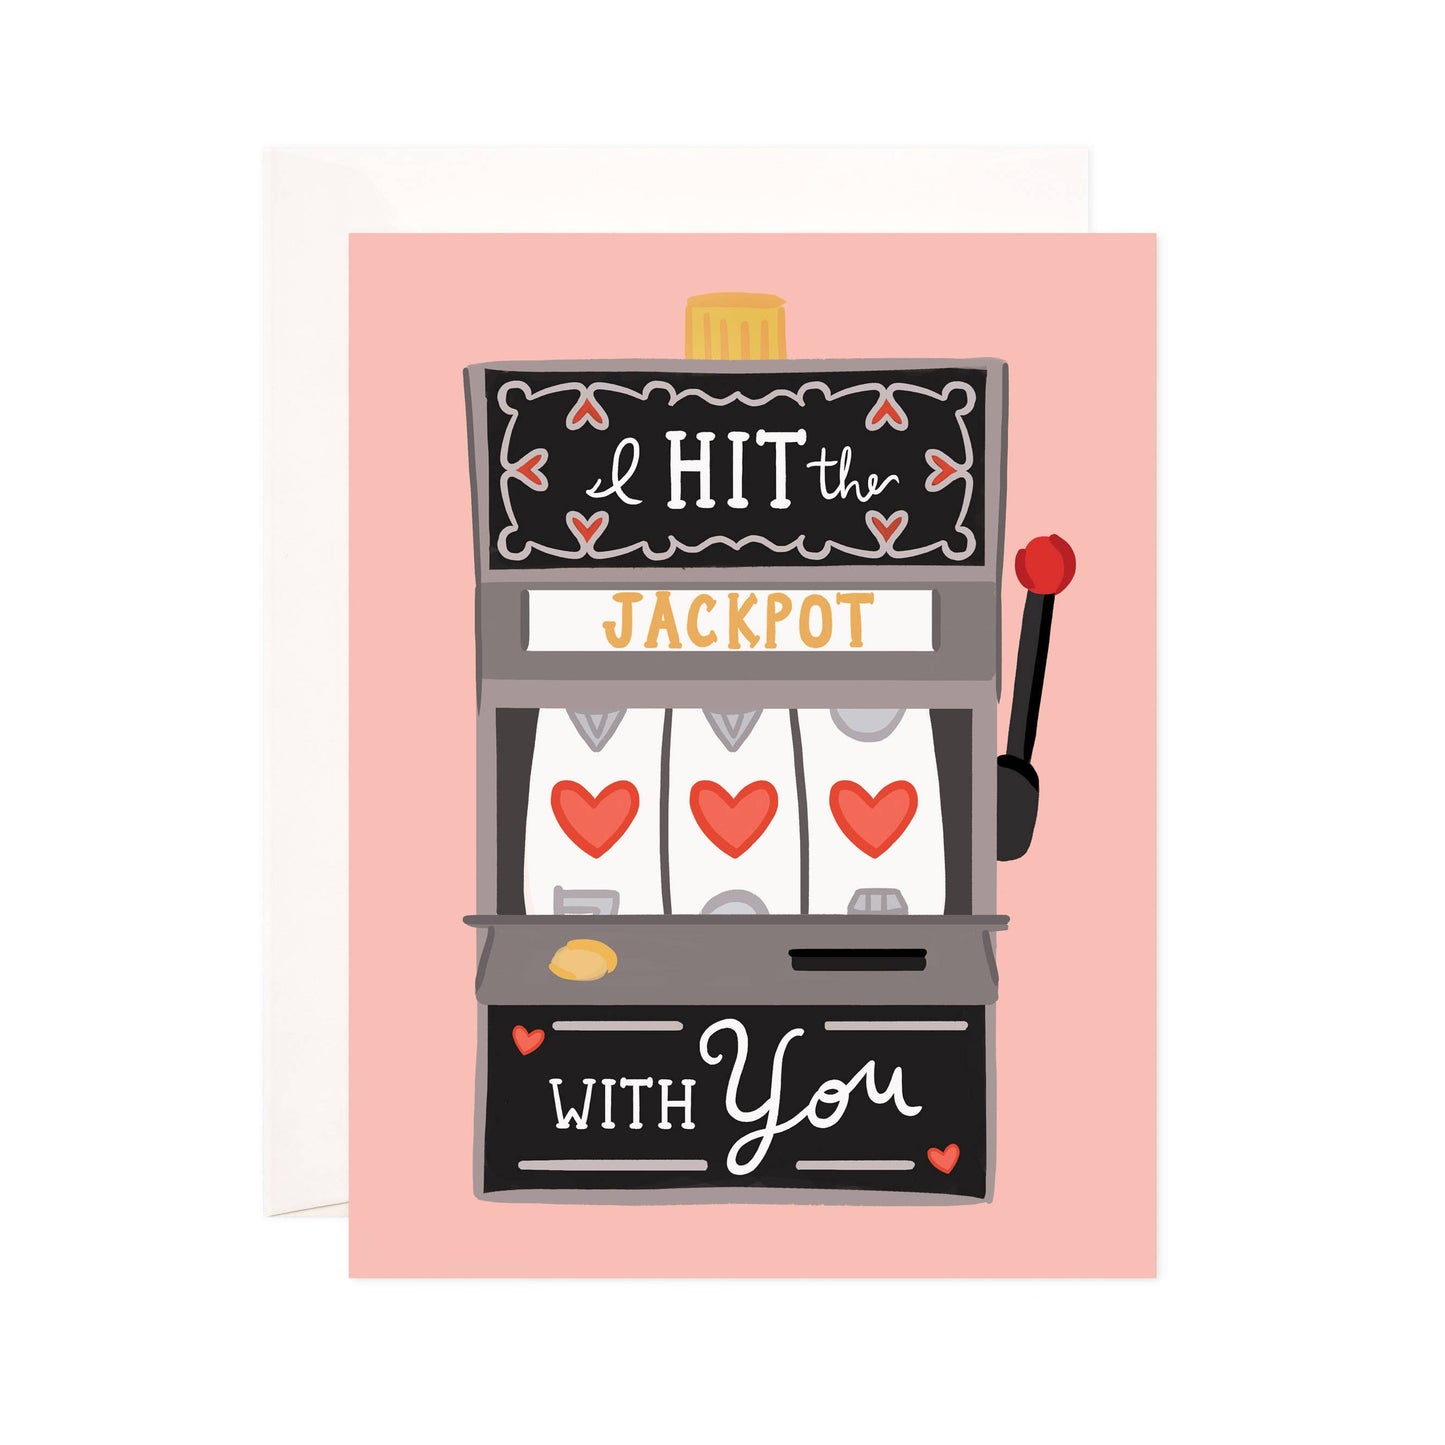 Love Jackpot Greeting Card - Perfect for Valentine's Day